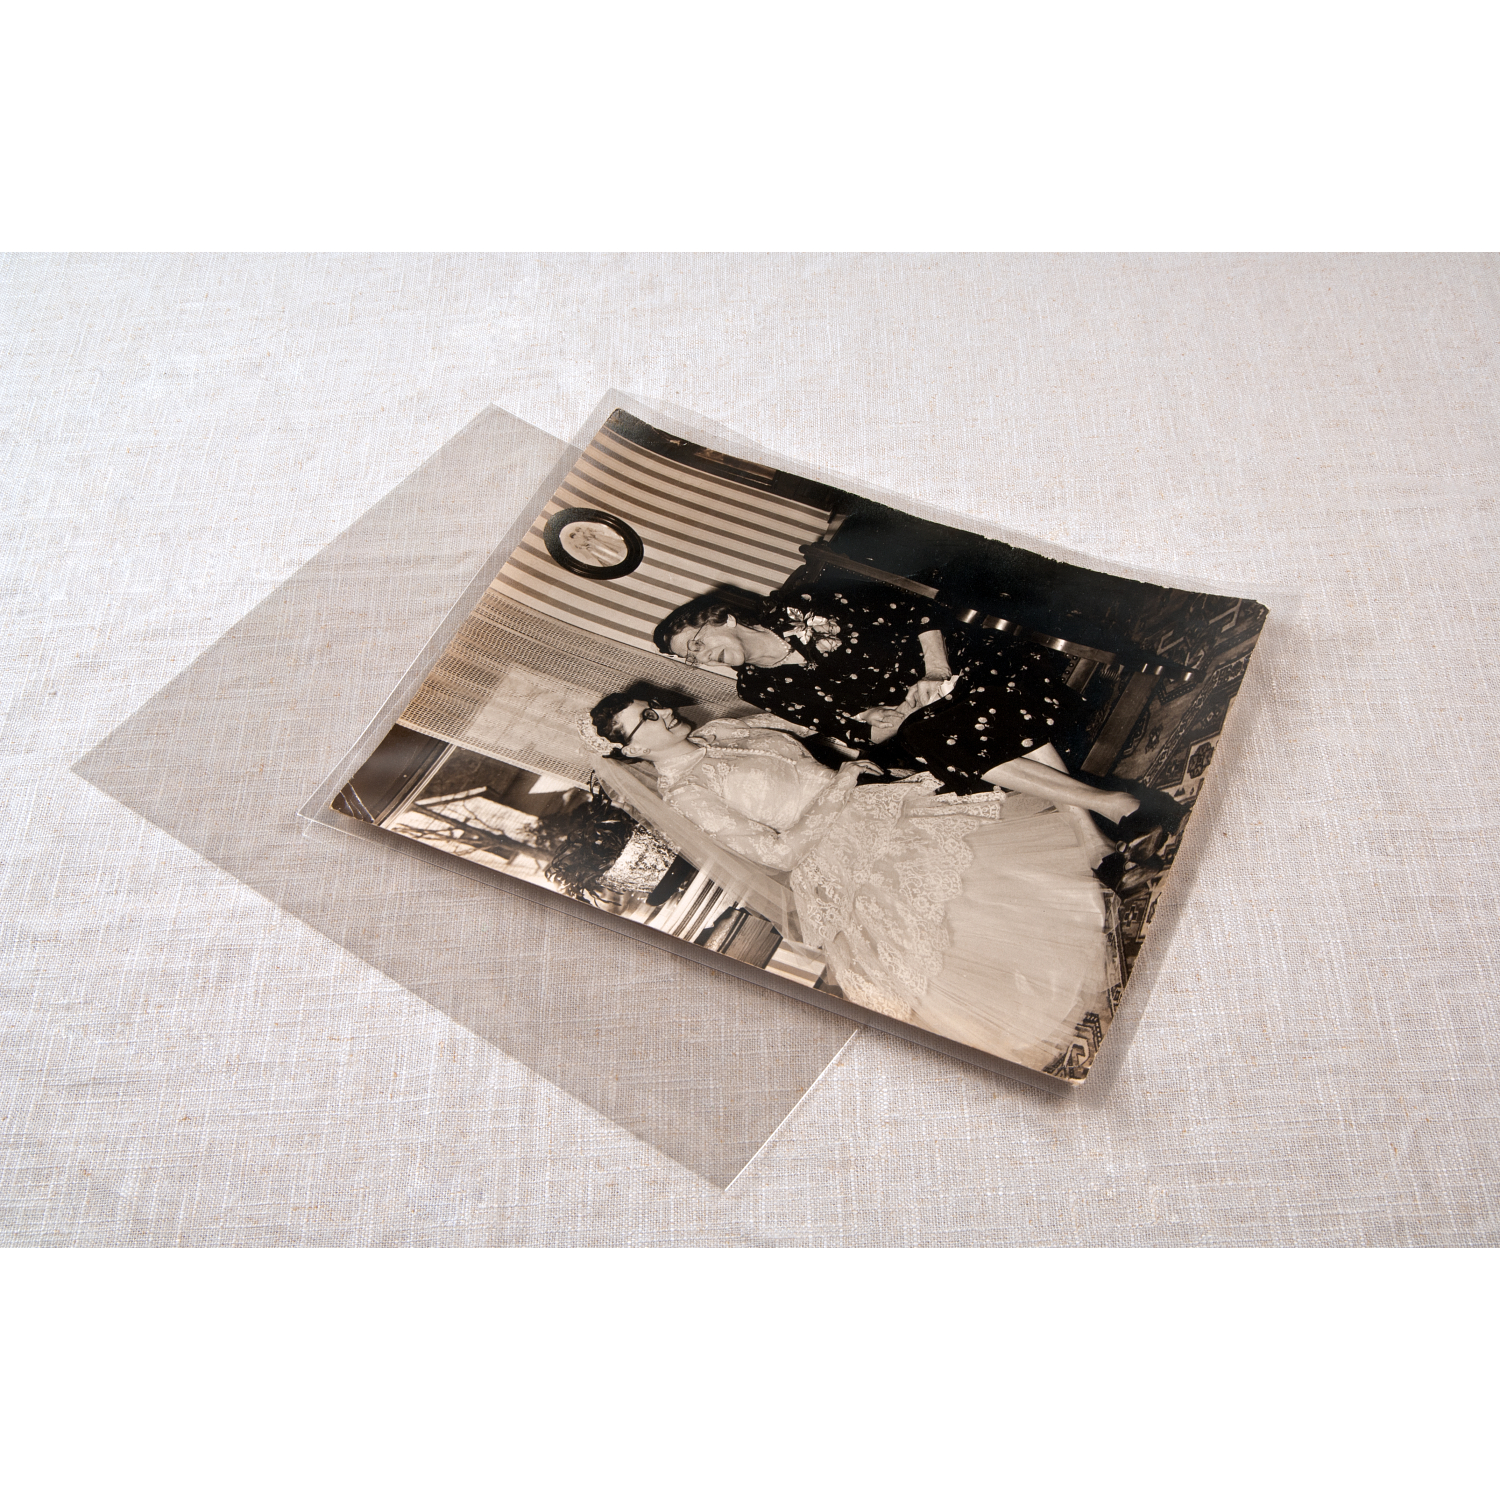 Gaylord Archival® 2 15/16 Clear Self-Adhesive Polypropylene Photo